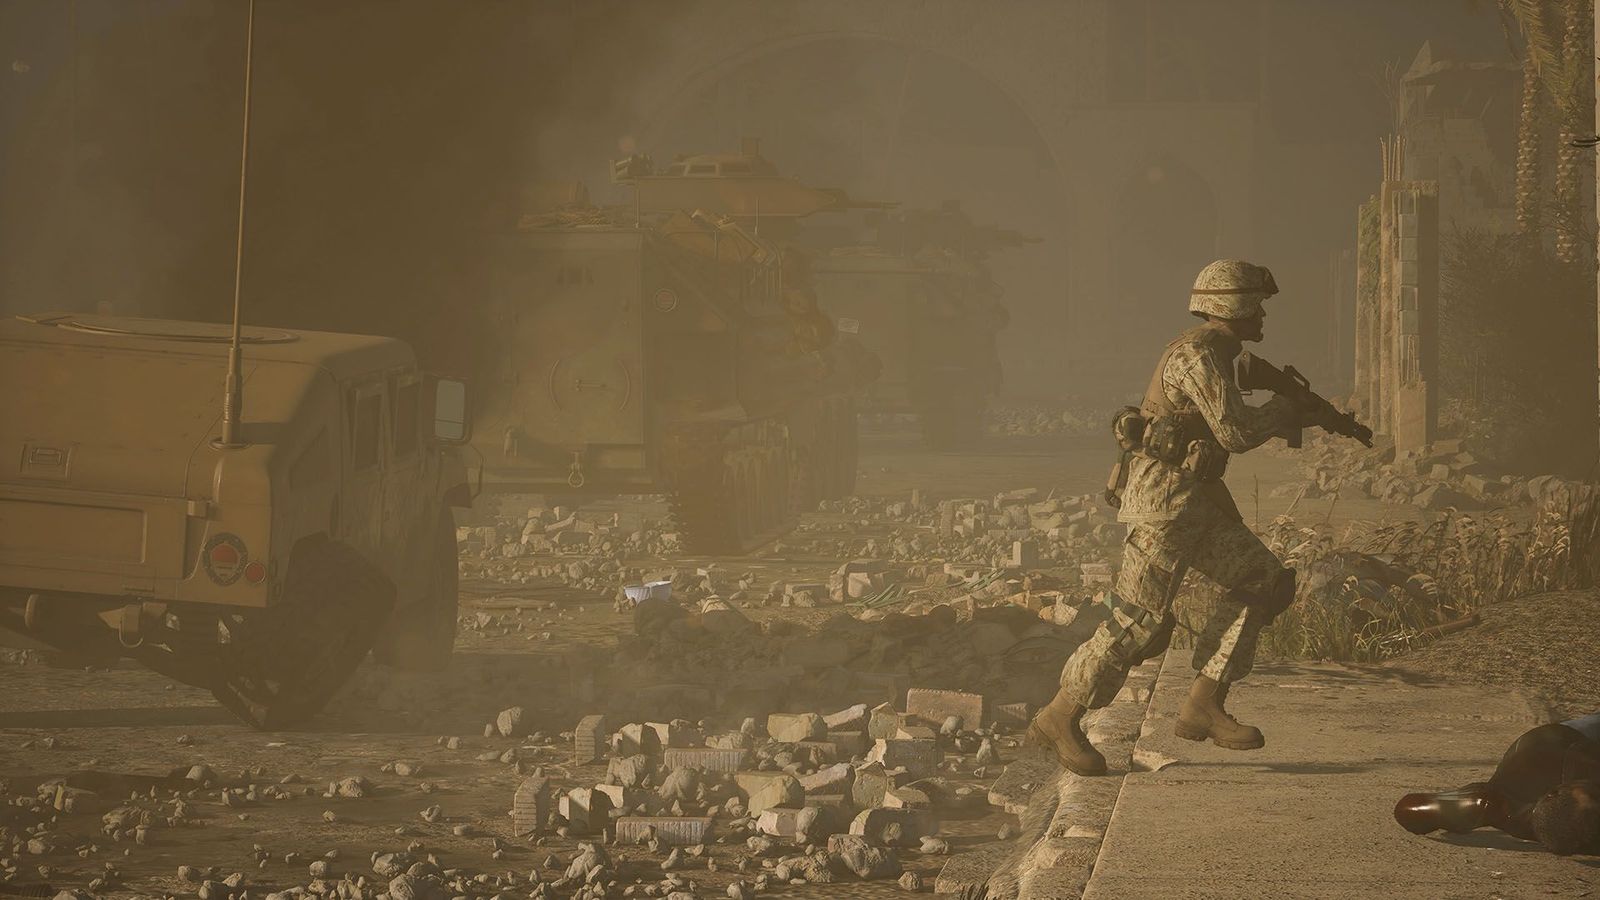 A screenshot from the video game Six Days in Fallujah. A U.S. Marine with M16 in hand steps off a rumble-strewn road where a humvee sits.